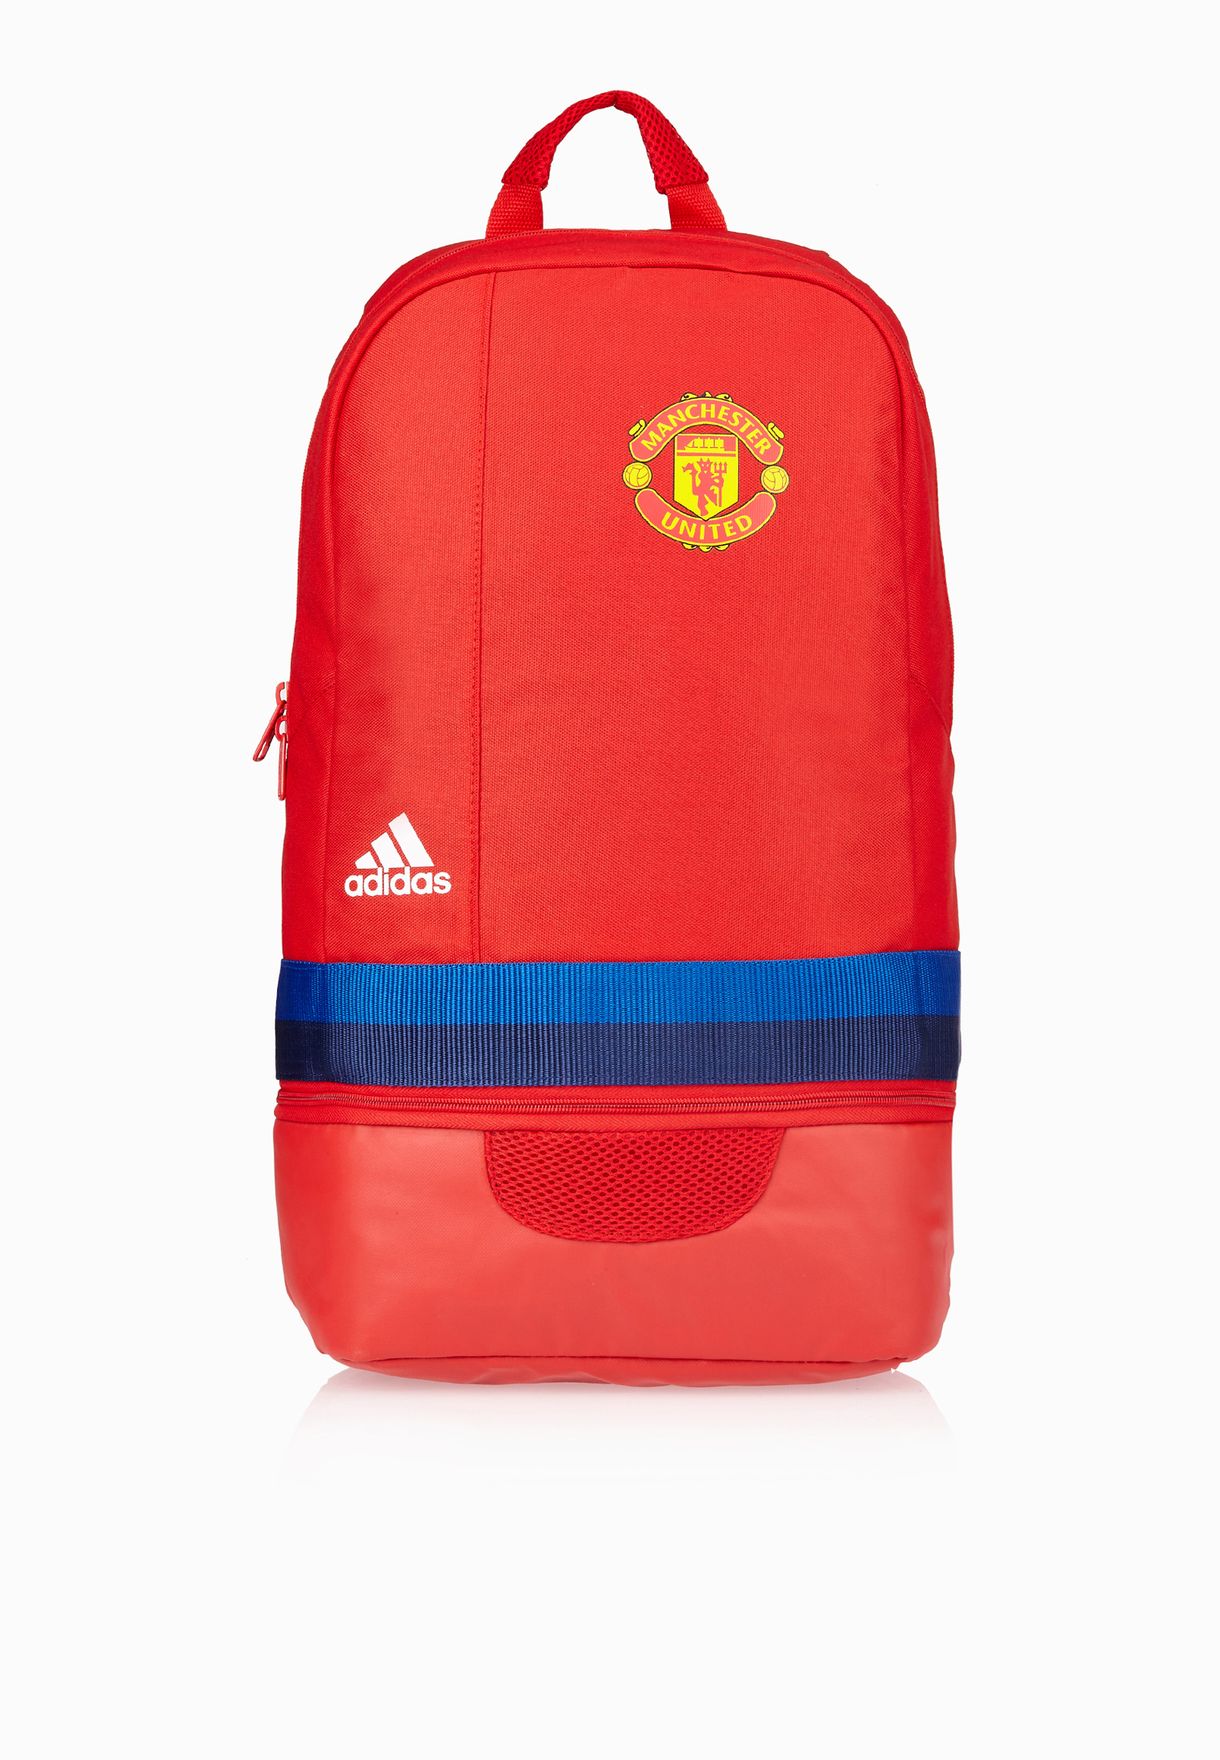 mufc backpack